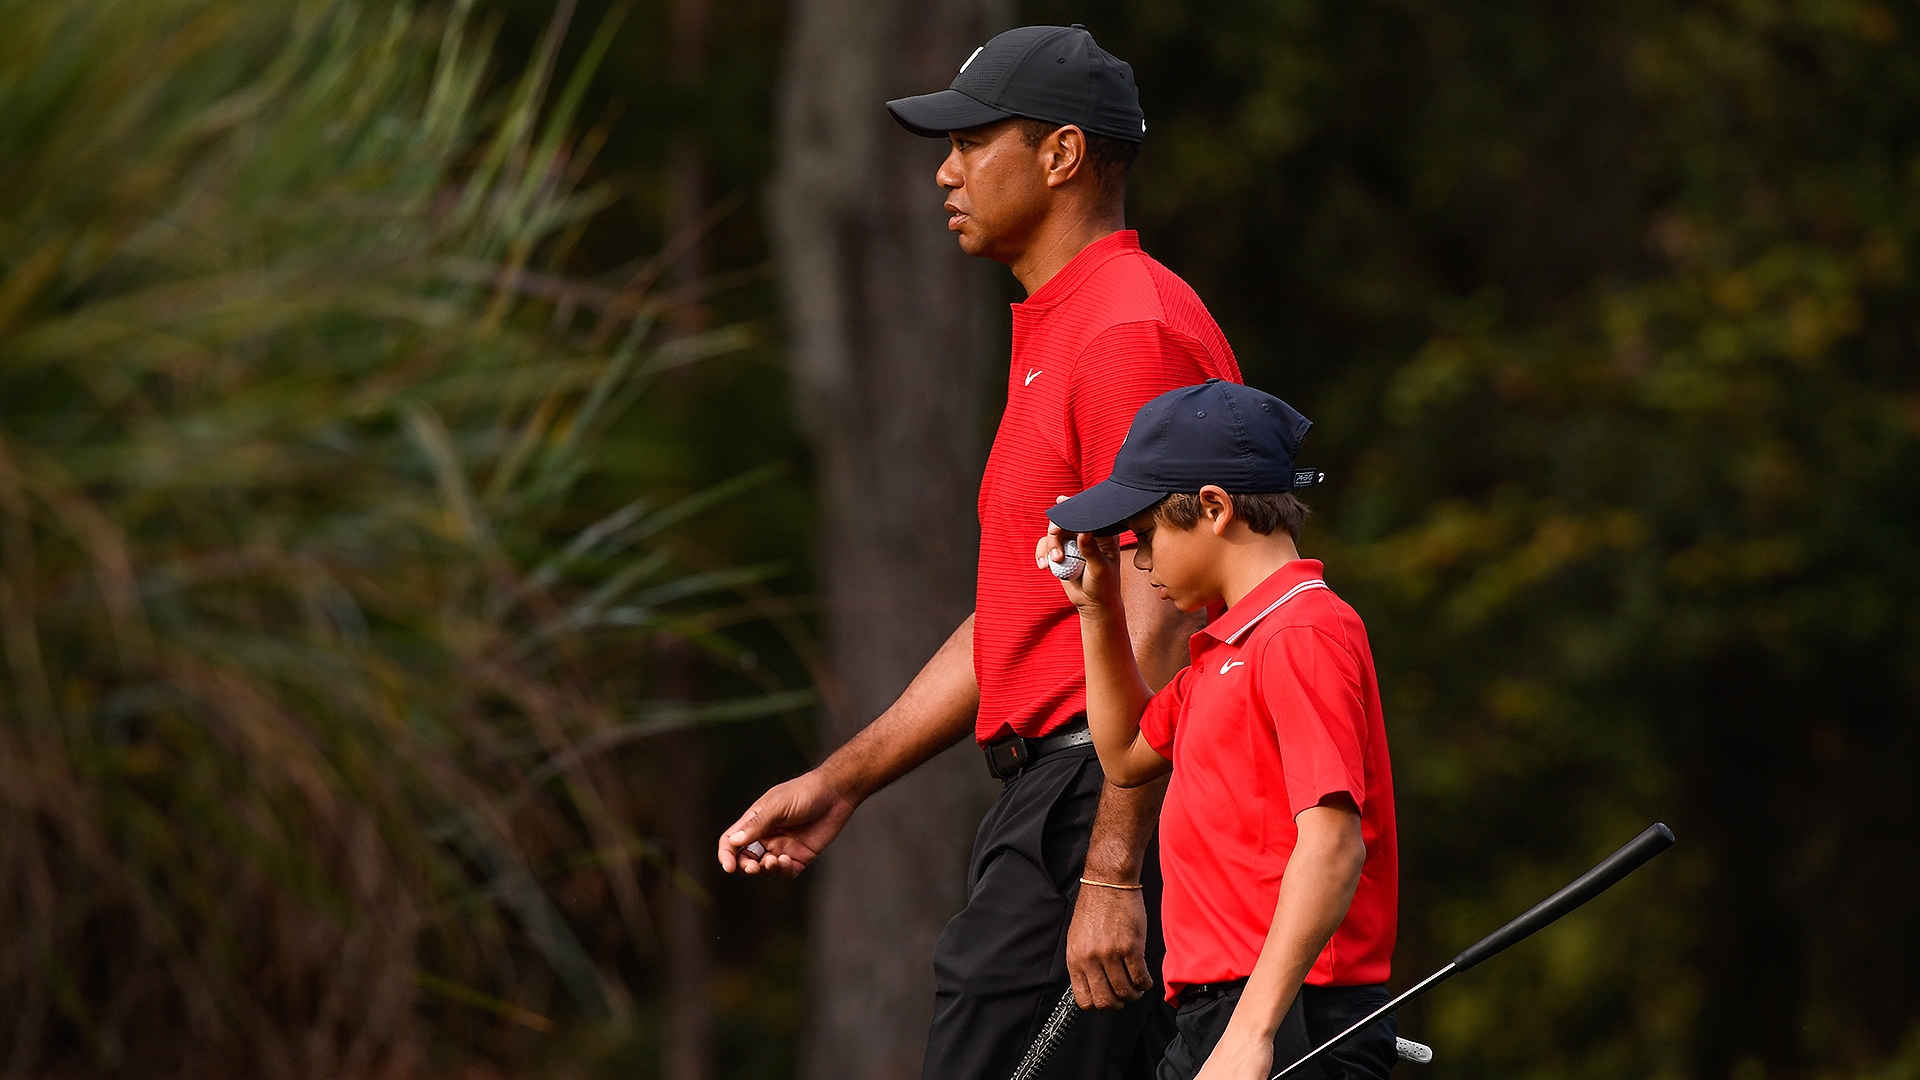 Watch: Tiger Woods captivated by video of he and son Charlie’s similarities